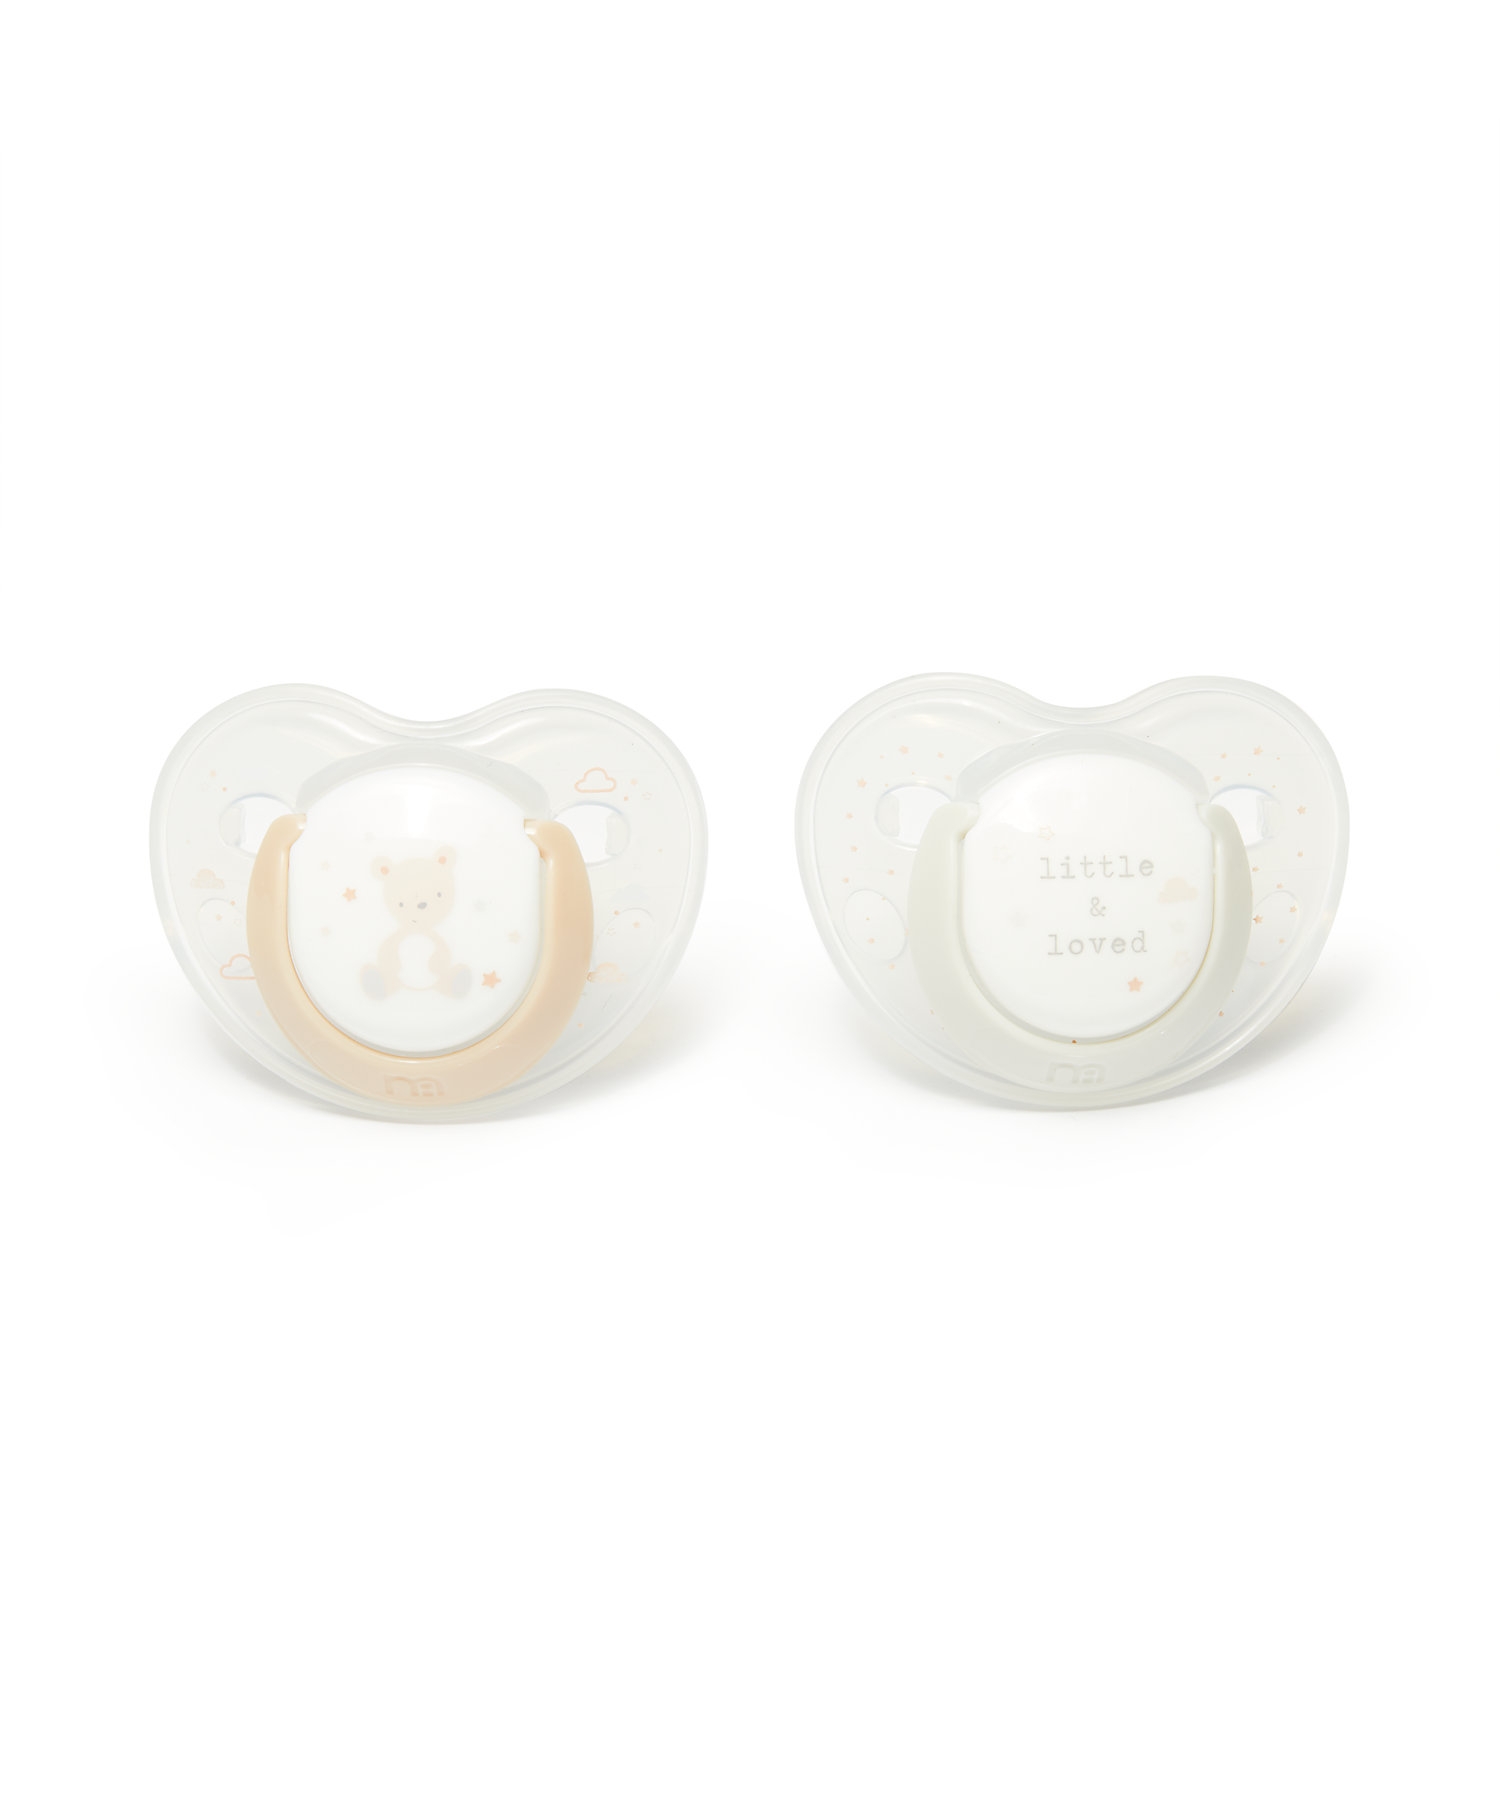 Mothercare Little And Loved Soother 0-6Months - 2 Pack